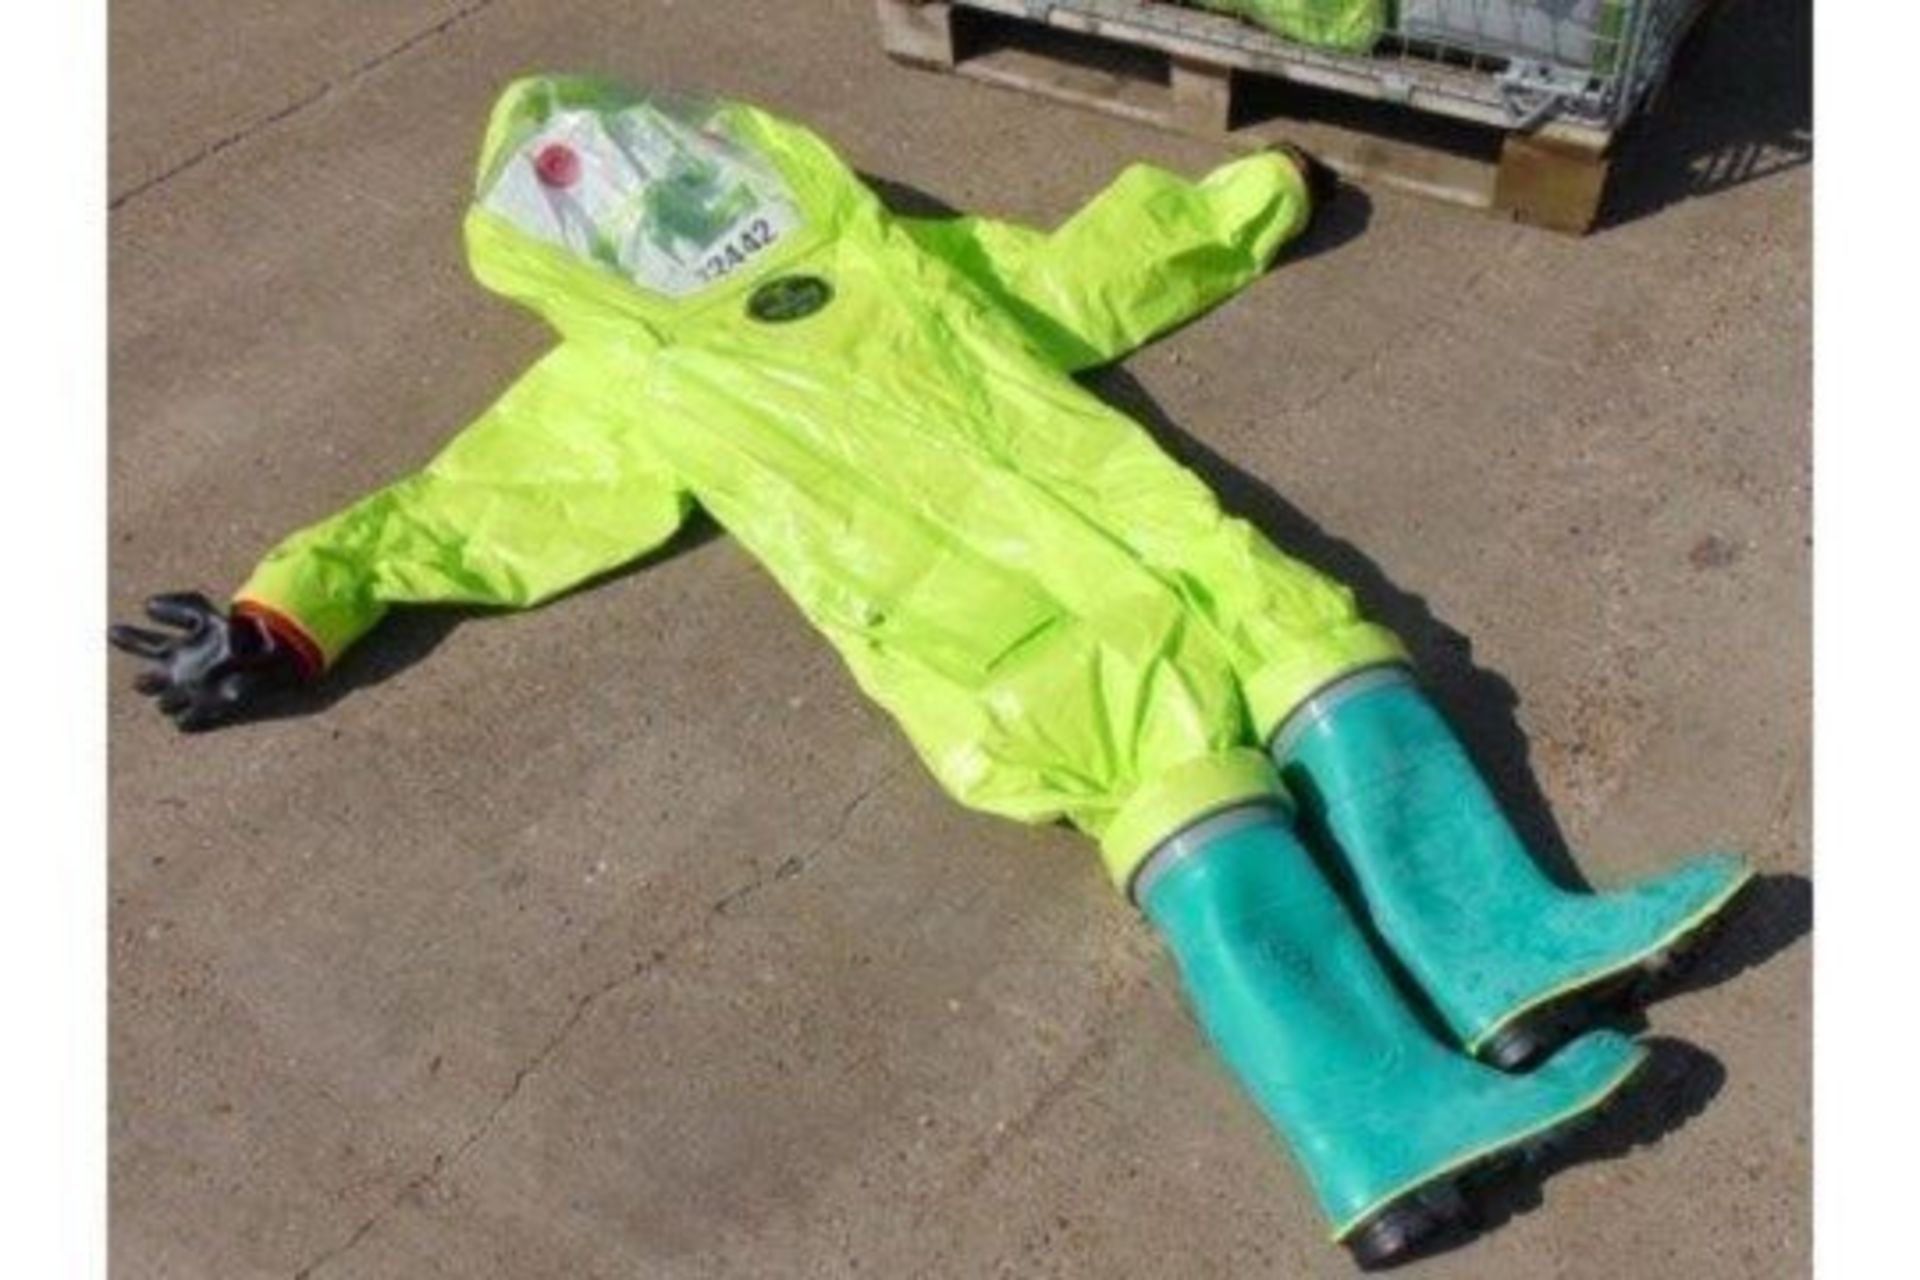 10 x Respirex Tychem TK Gas-Tight Hazmat Suit Type 1A with Attached Boots and Gloves. - Image 6 of 10